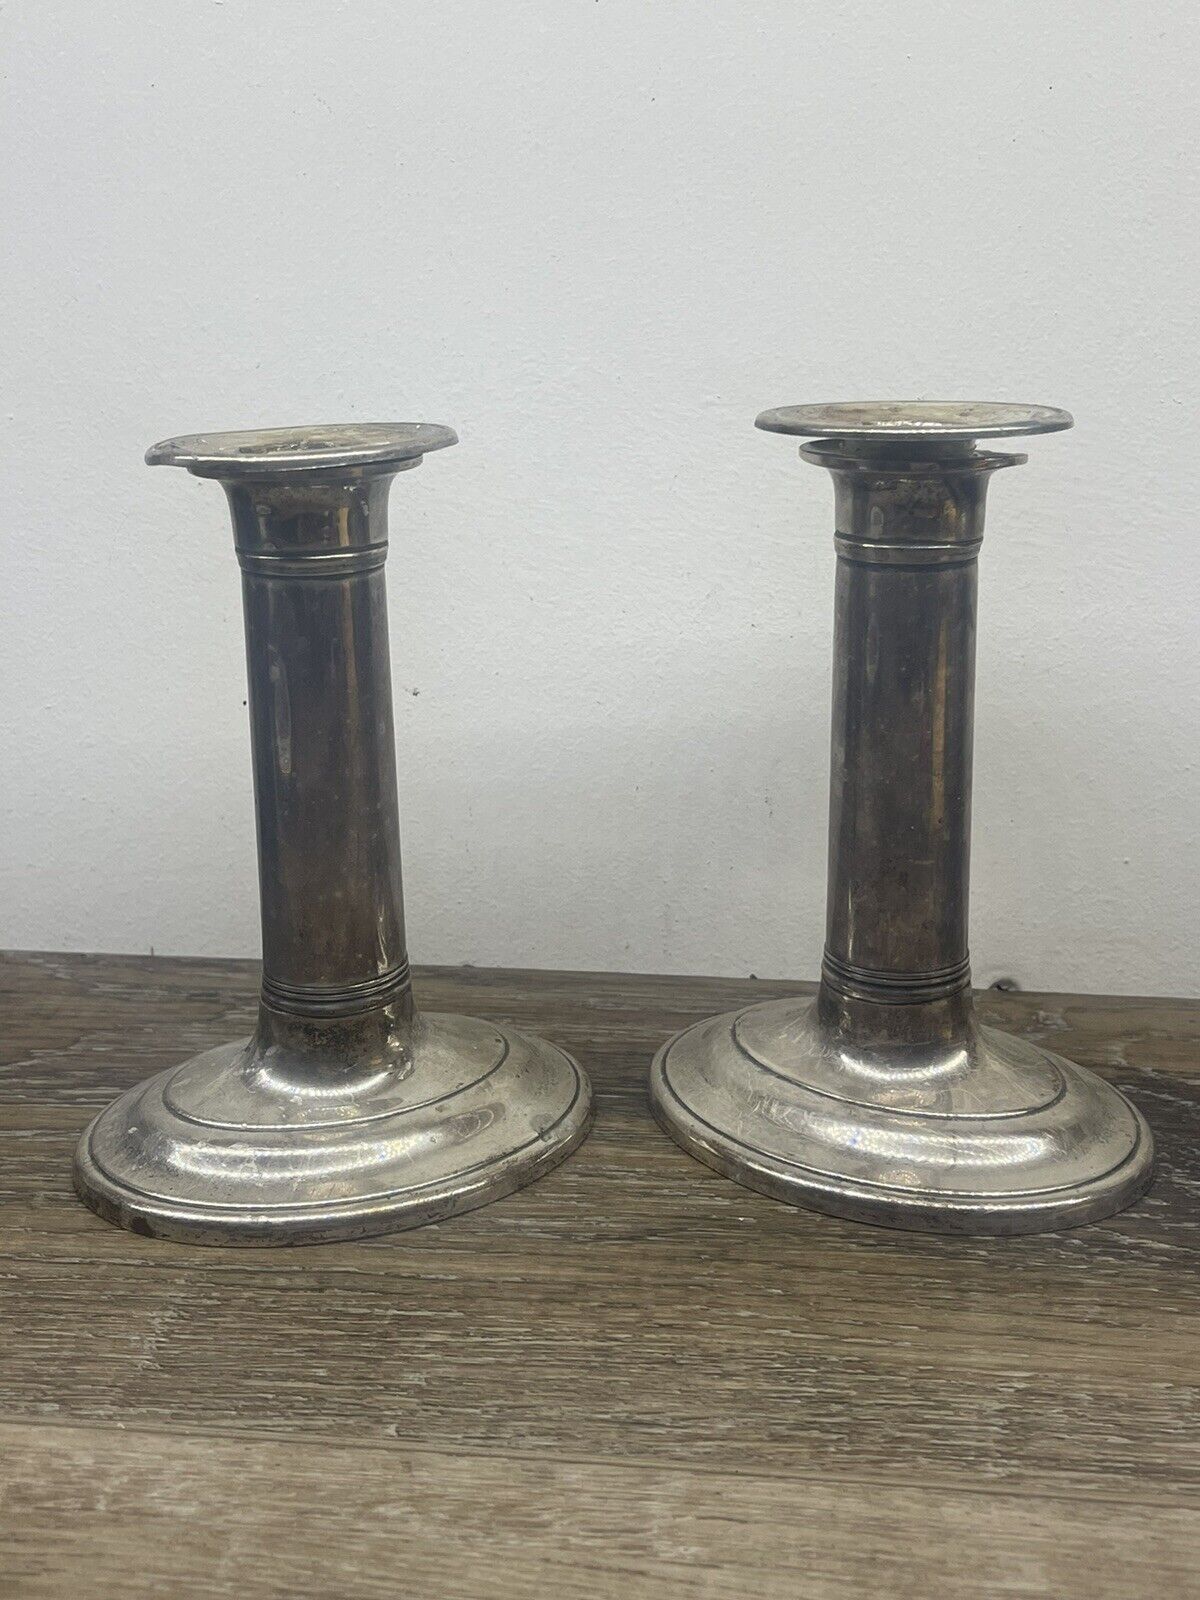 Stieff Sterling Colonial Williamsburg Candle Sticks R.T. 24 L@@K